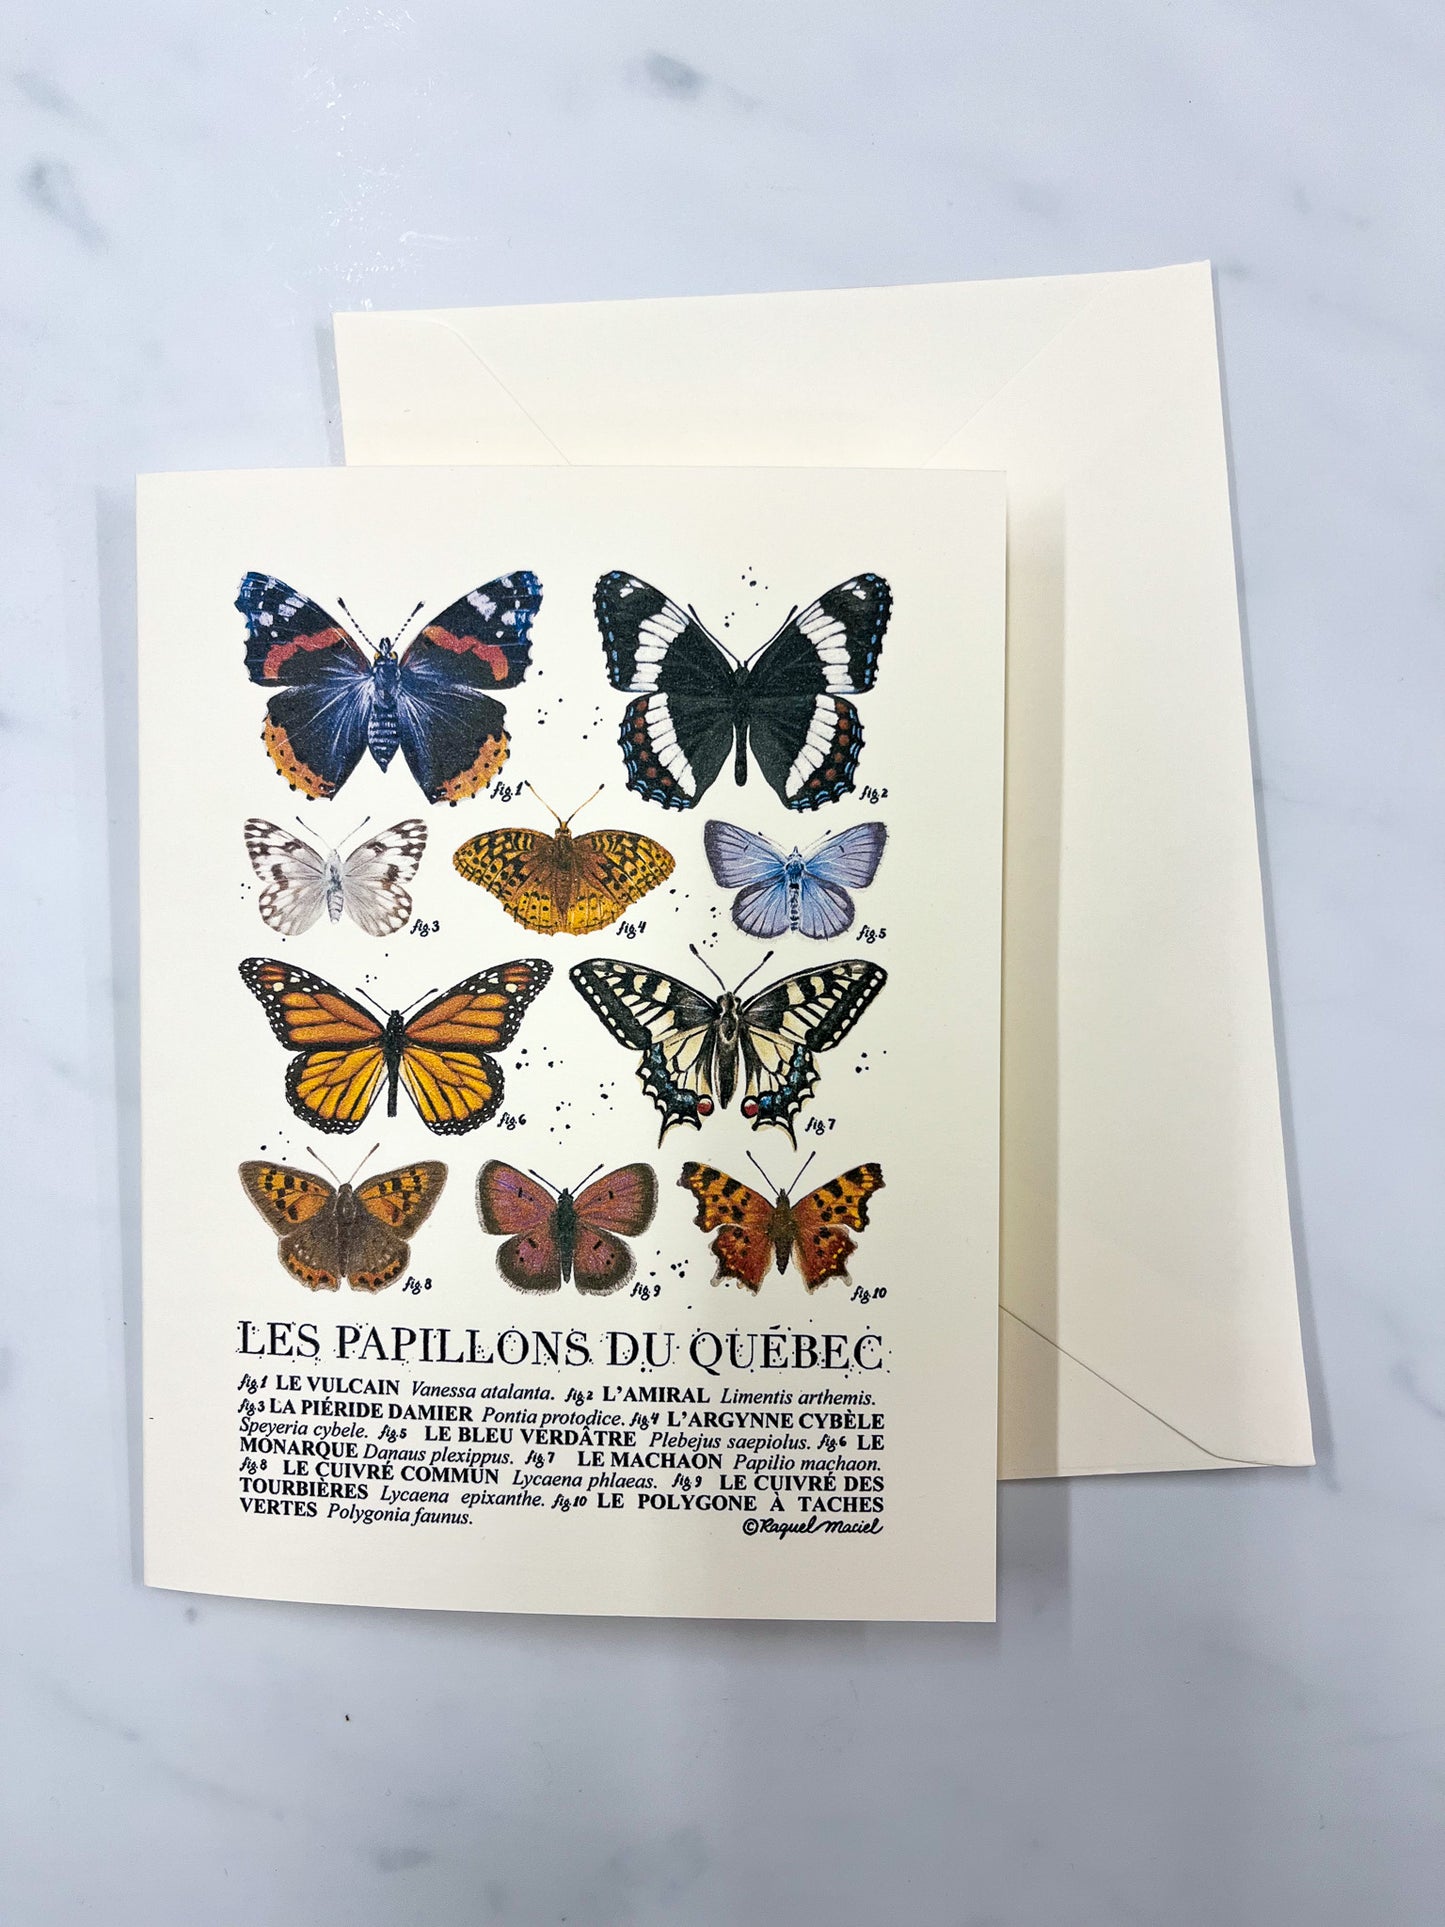 Beige card and envelope with "Les Papillons du Quebec" along with illustrations of 10 different varieties of butterflies